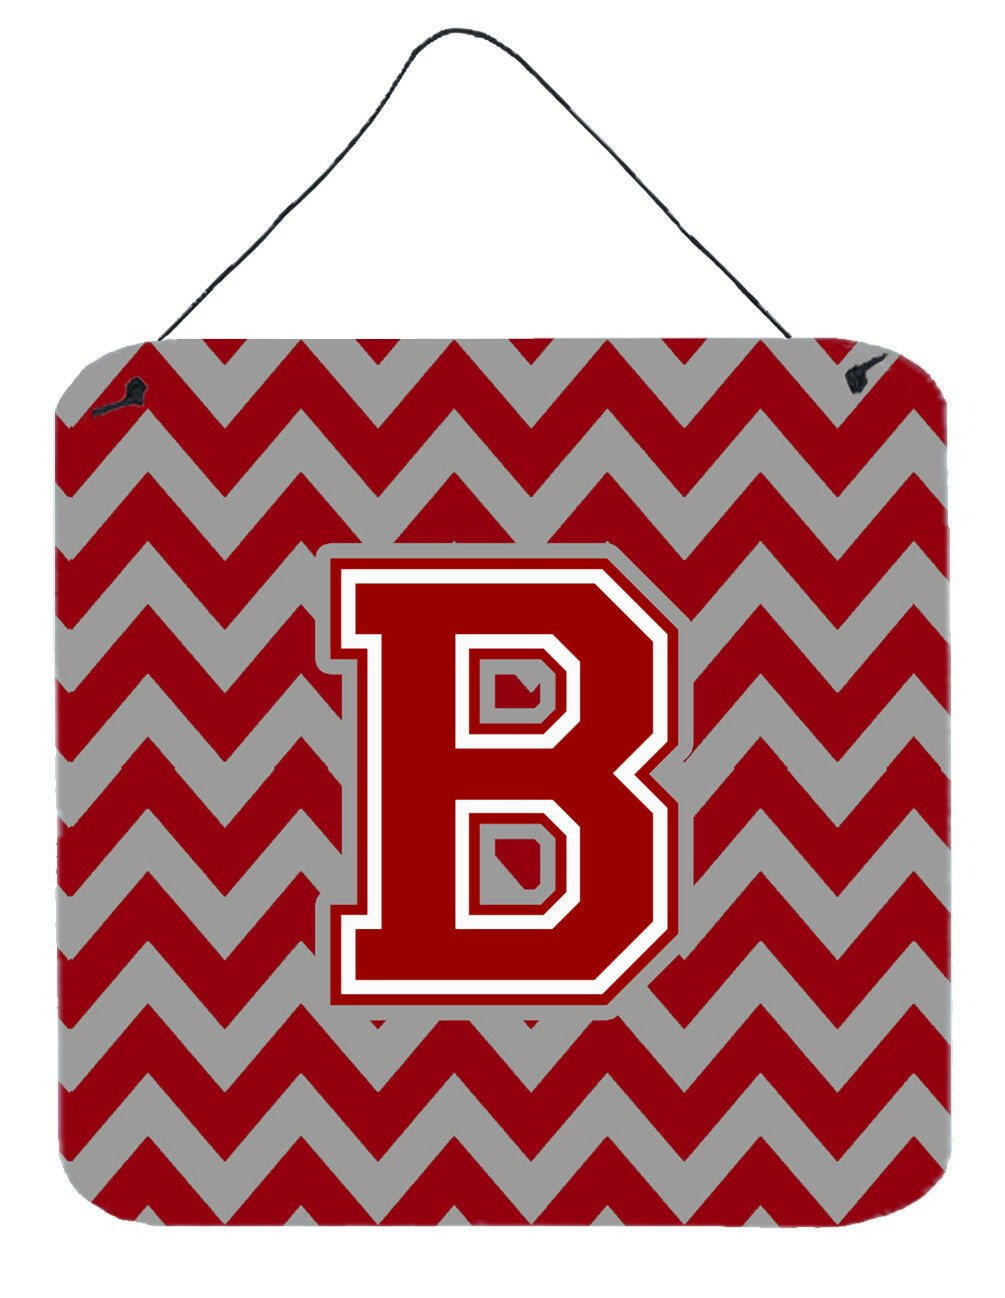 Letter B Chevron Maroon and White Wall or Door Hanging Prints CJ1049-BDS66 by Caroline's Treasures